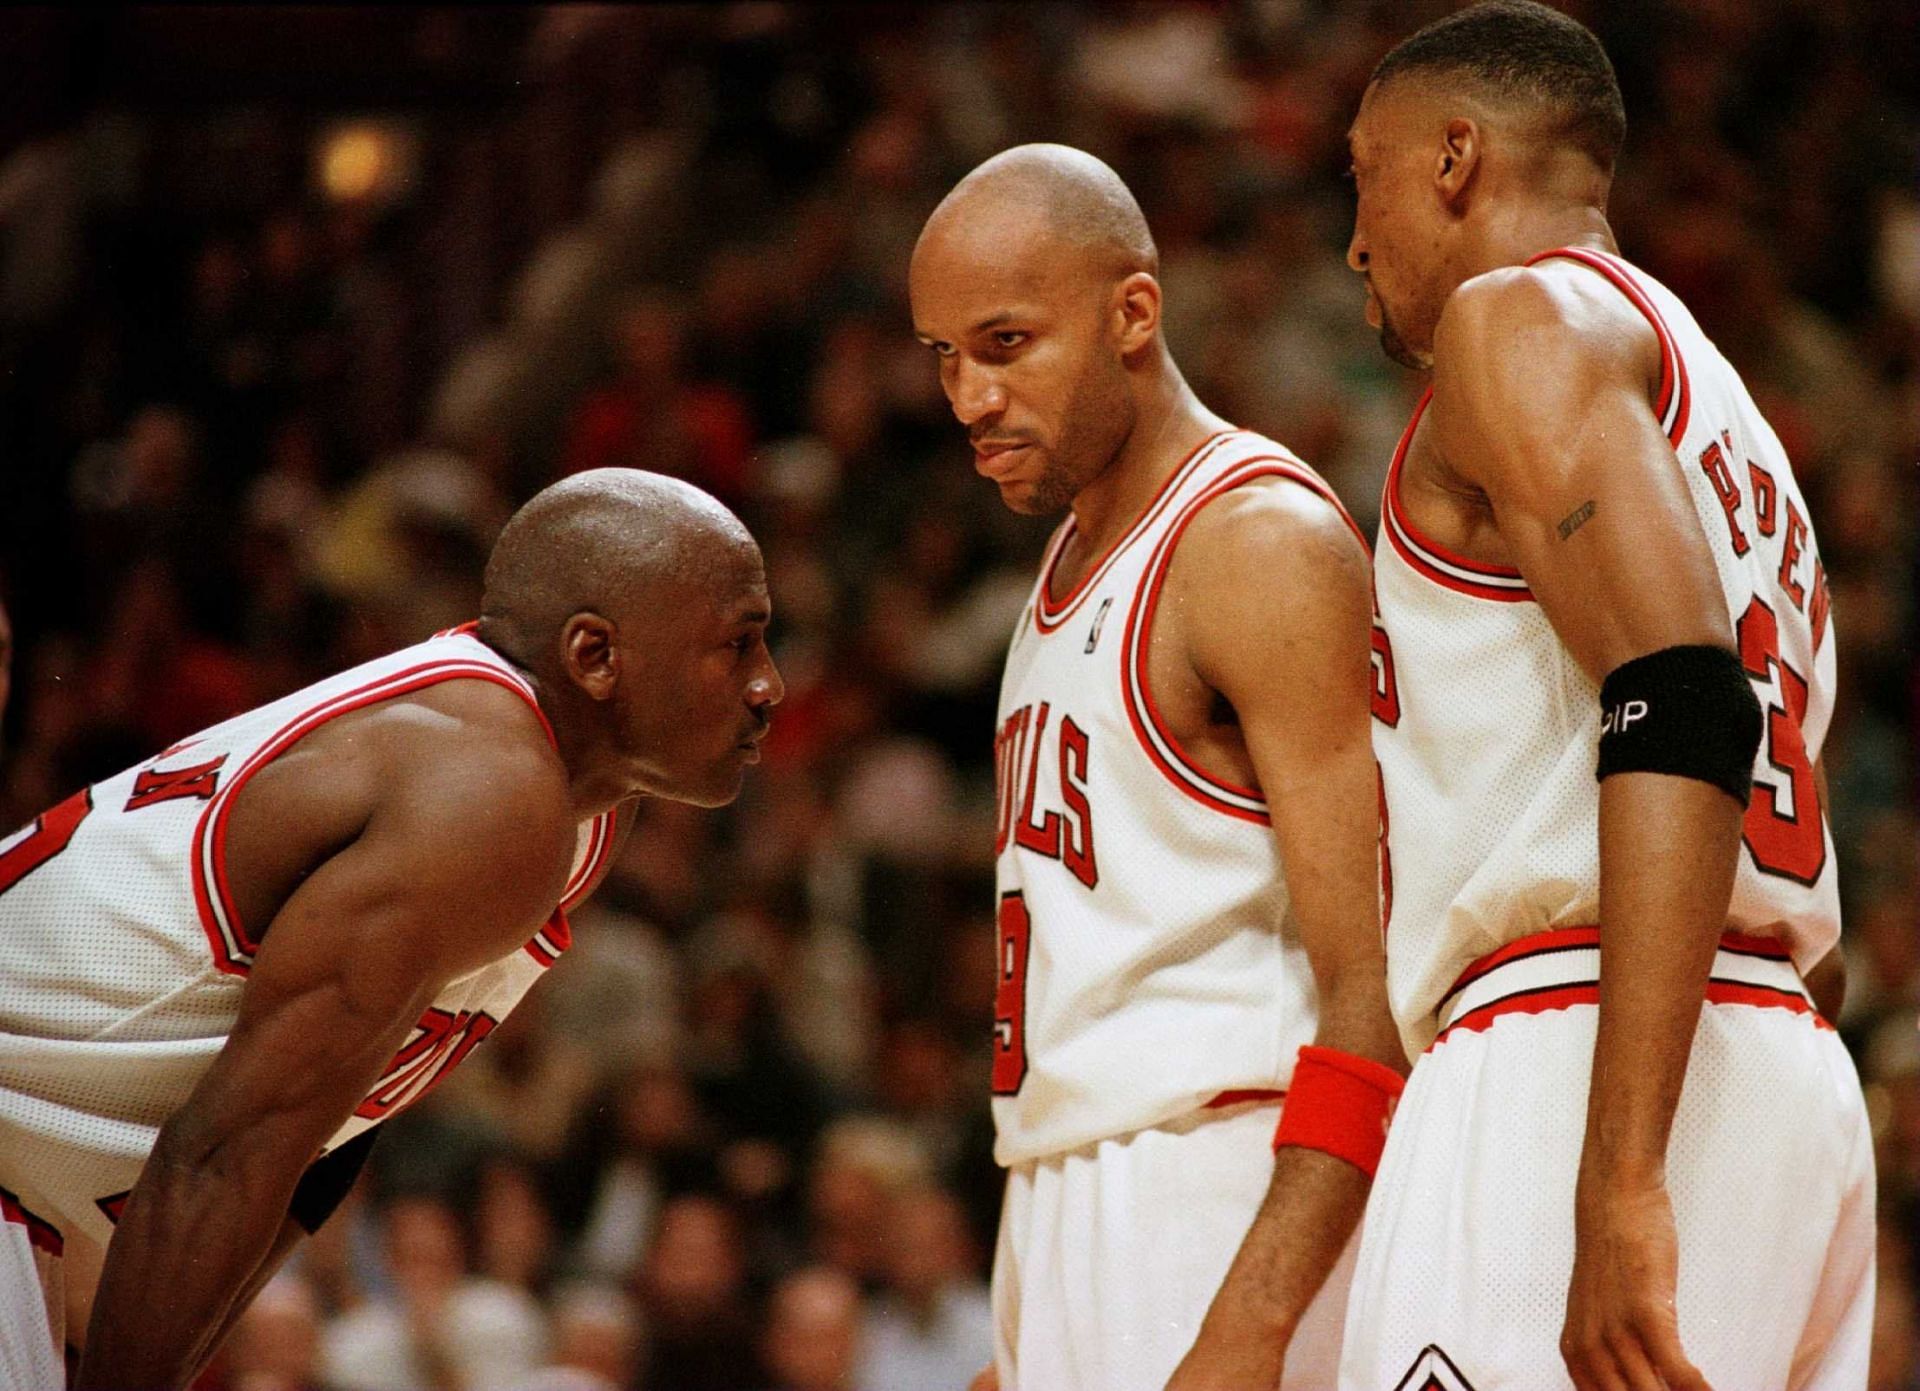 Michael Jordan of the Chicago Bull, left, discusses strategy with teammates Ron Harper, center, and Scottie Pippen